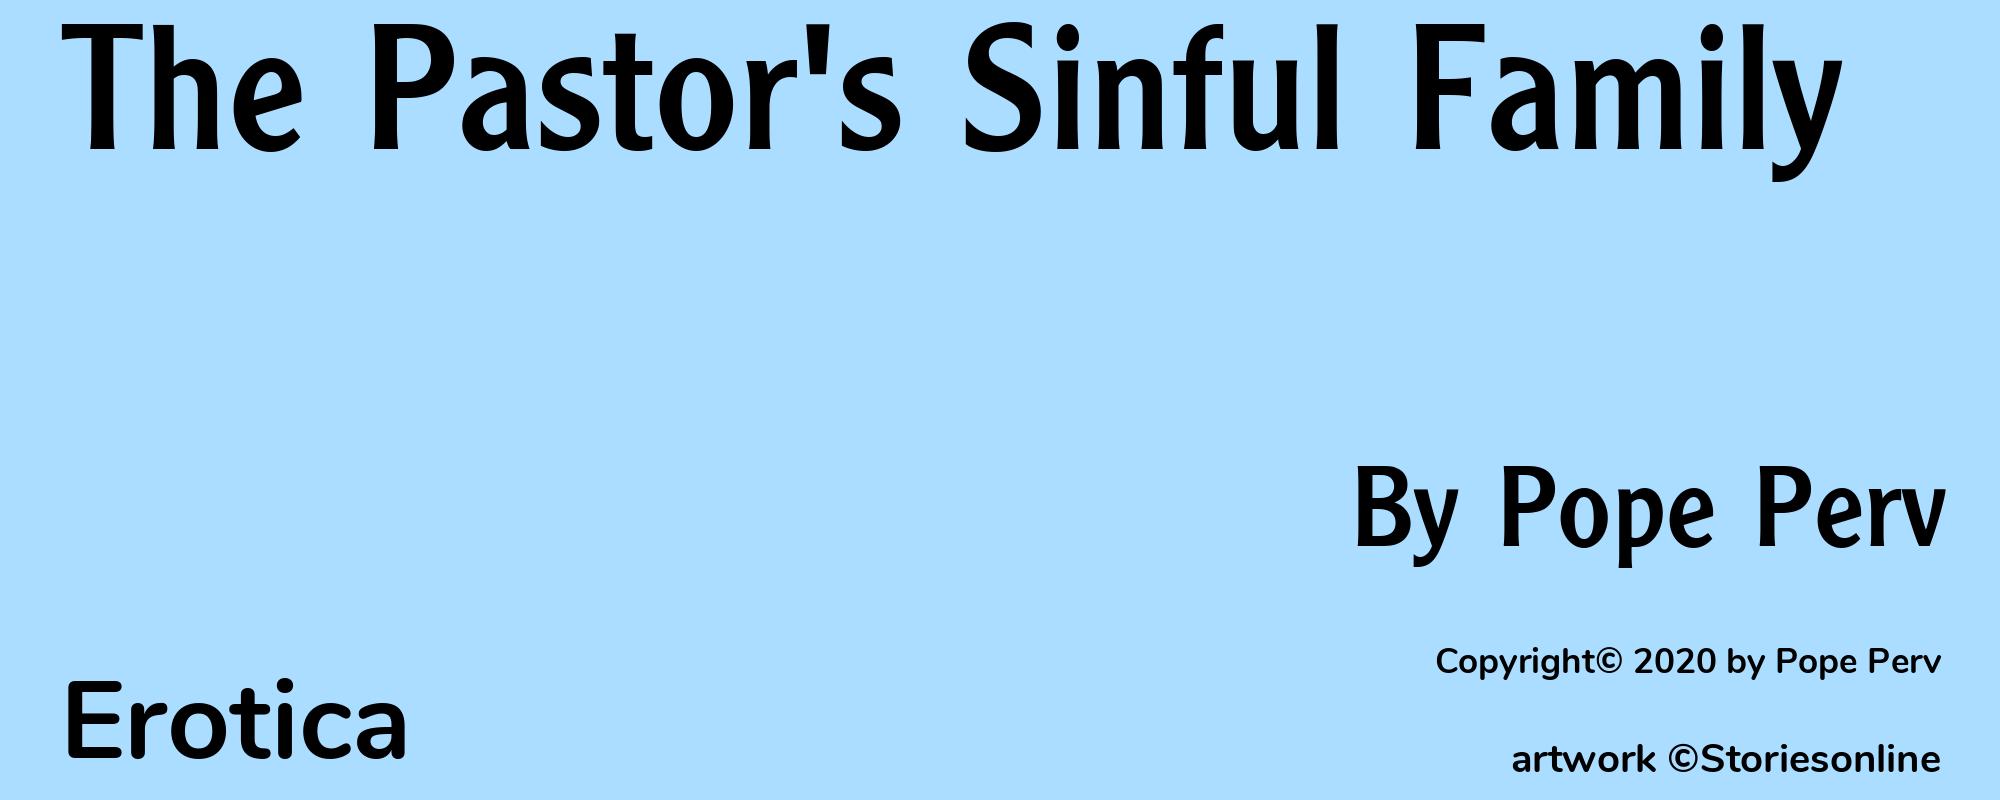 The Pastor's Sinful Family - Cover